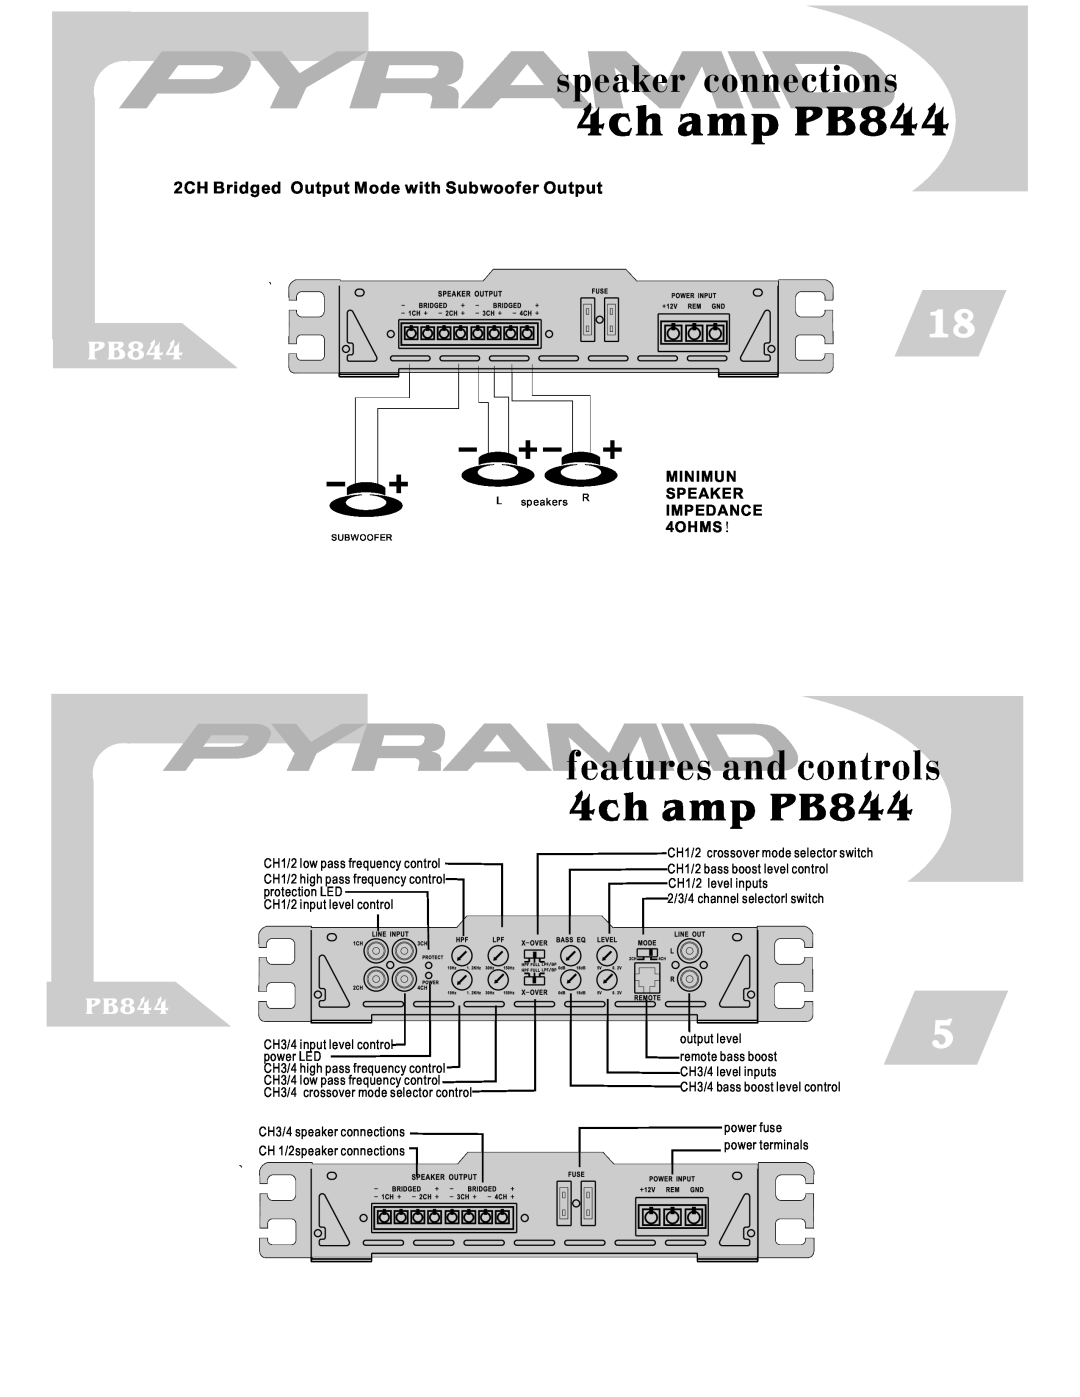 Pyramid Car Audio PB744, PB1644 4ch amp PB844, features and controls, speaker connections, MINIMUN SPEAKER IMPEDANCE 4OHMS 